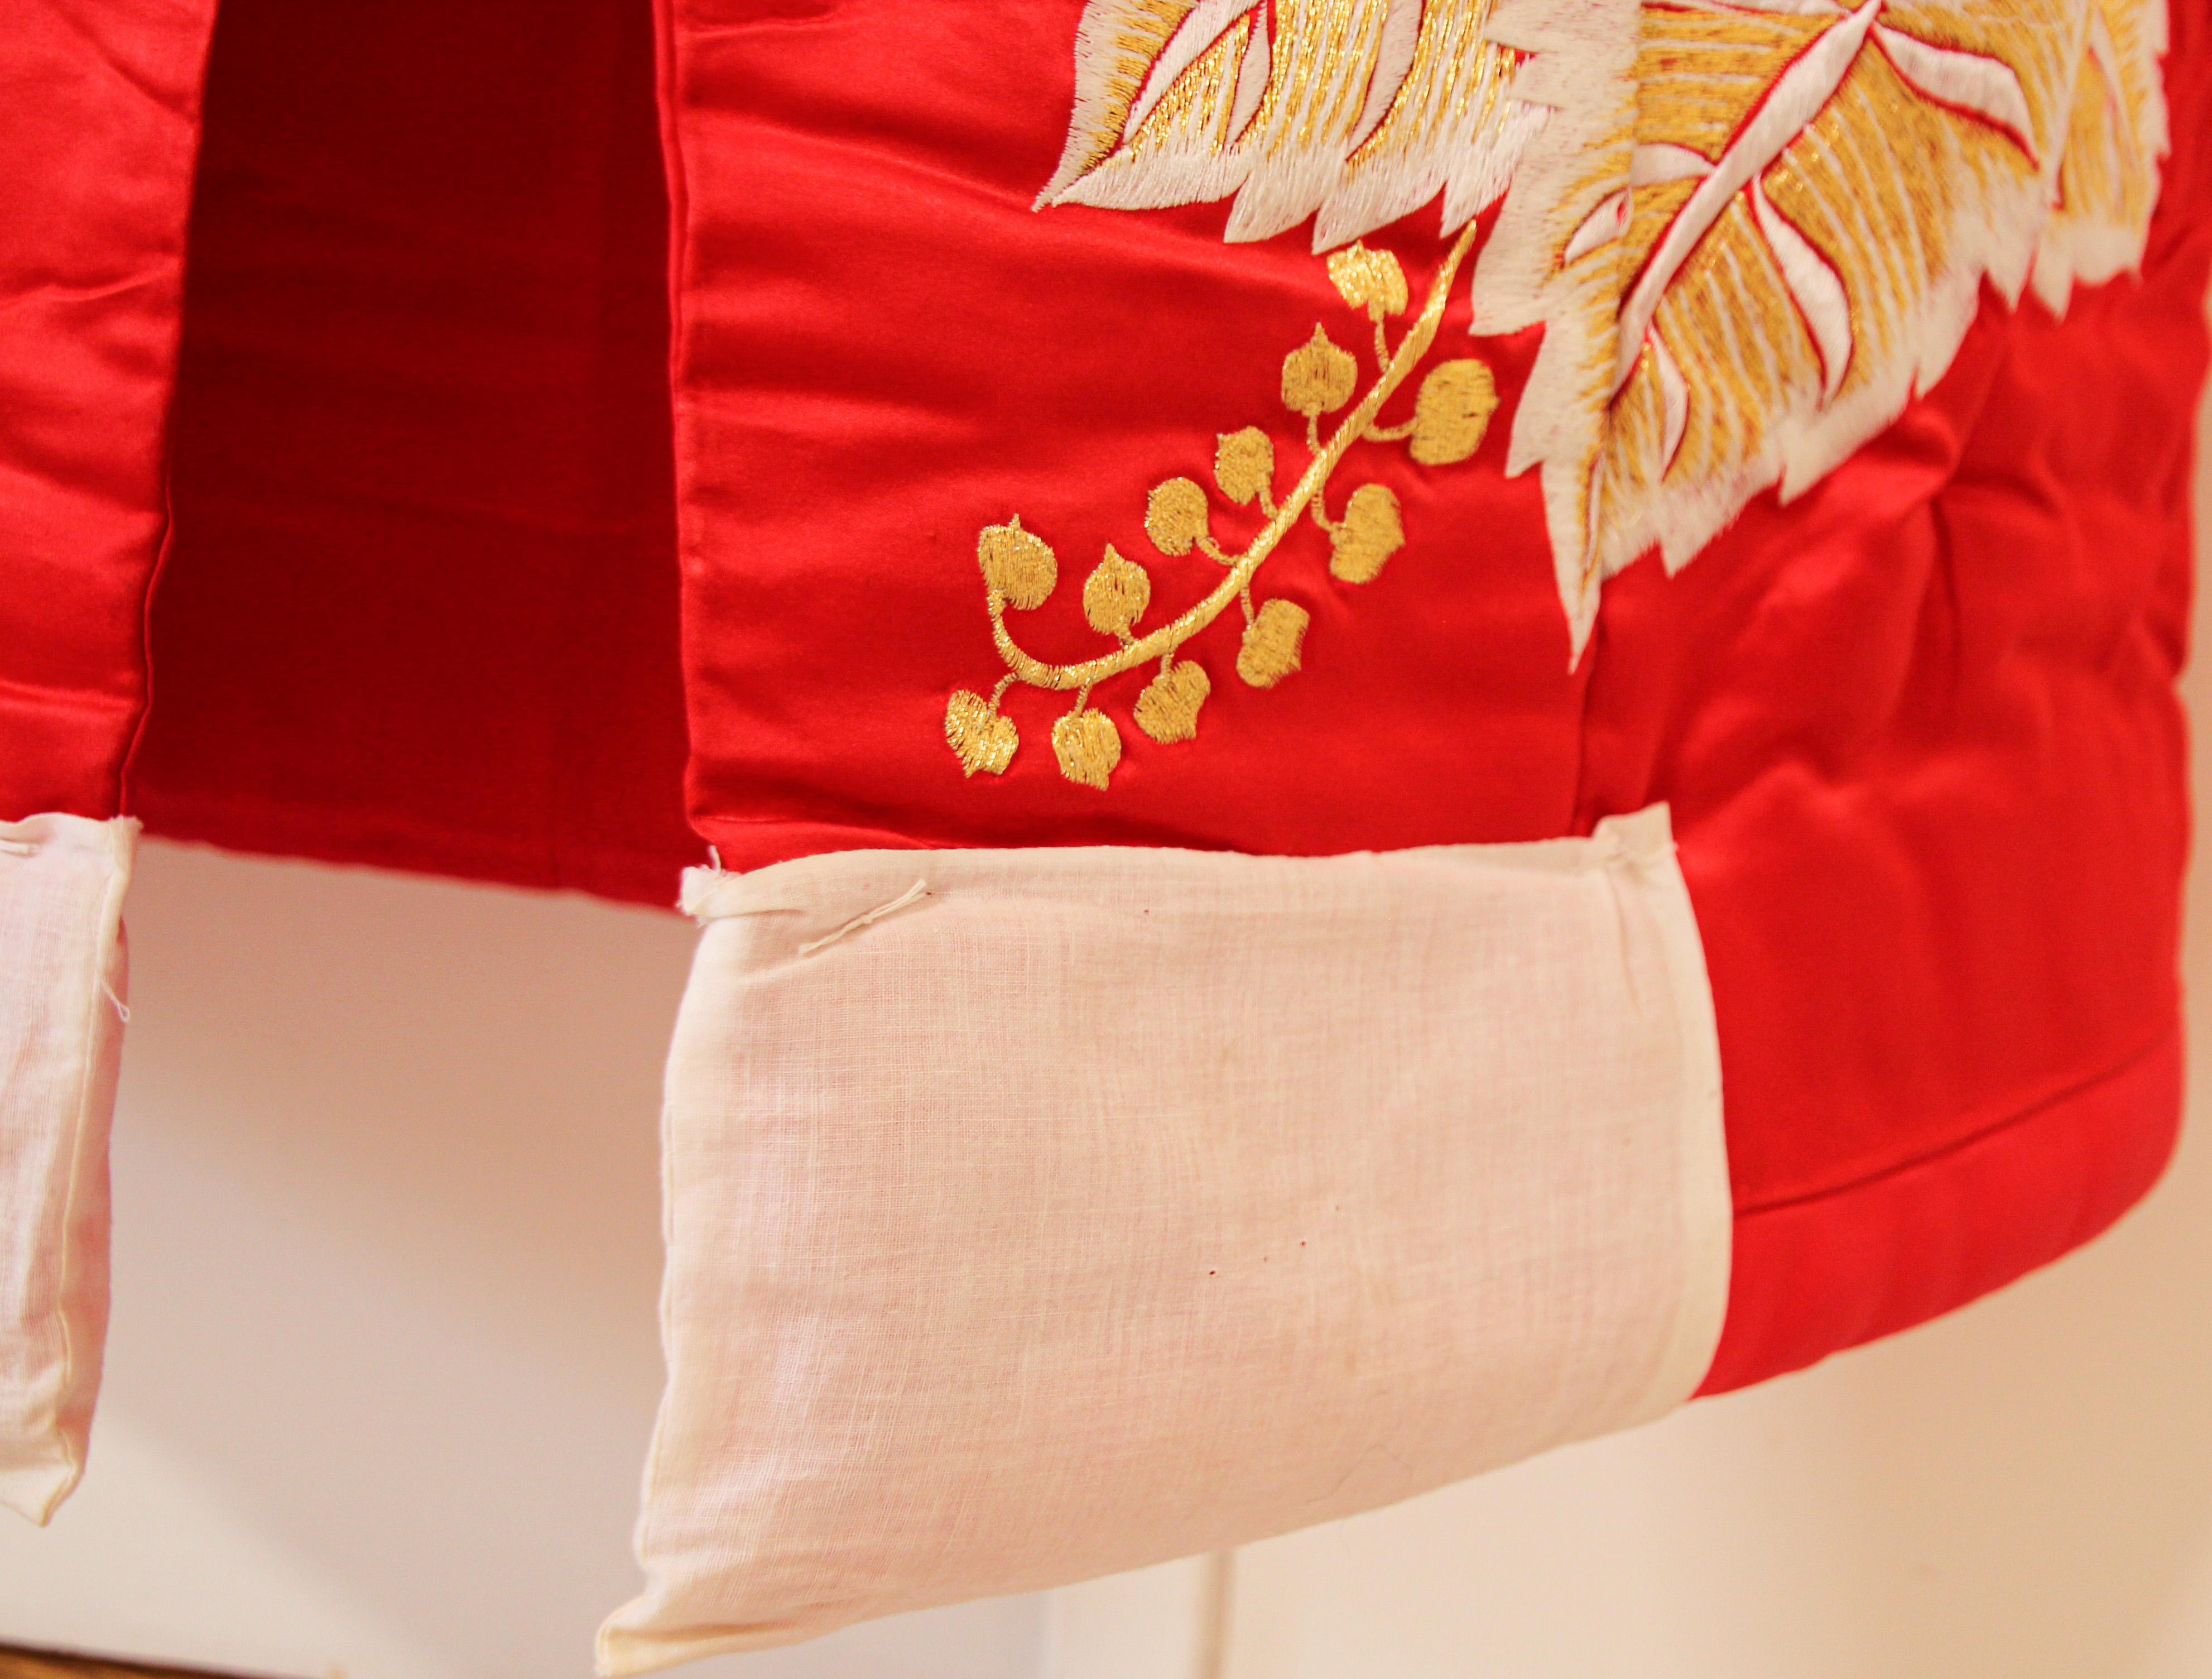 Vintage Kimono Red Silk Brocade Japanese Ceremonial Wedding Dress In Good Condition For Sale In North Hollywood, CA